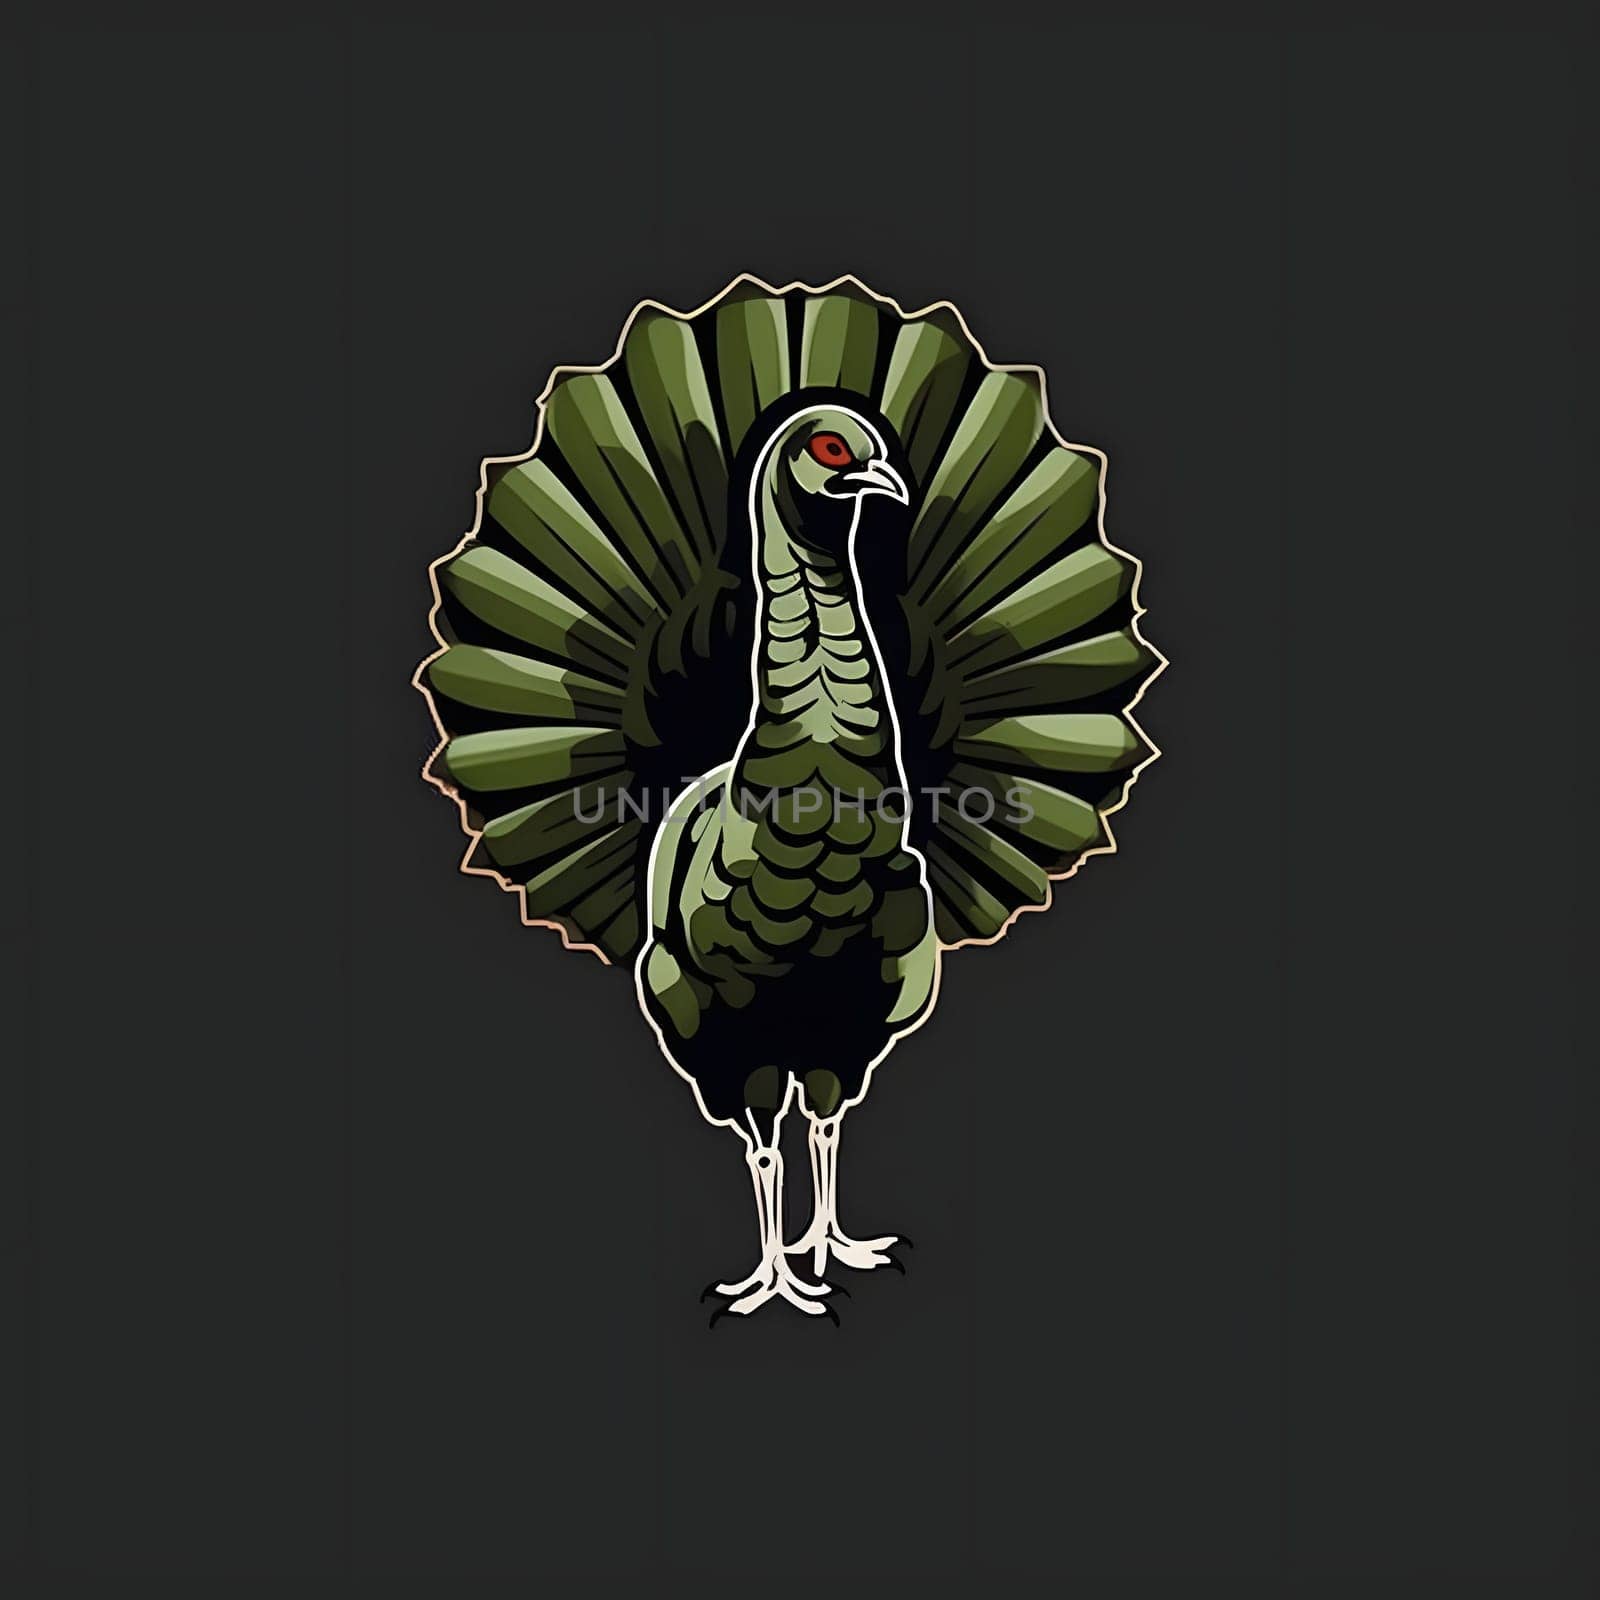 Sticker green Indy alien isolated on a dark background. Turkey as the main dish of thanksgiving for the harvest. An atmosphere of joy and celebration.